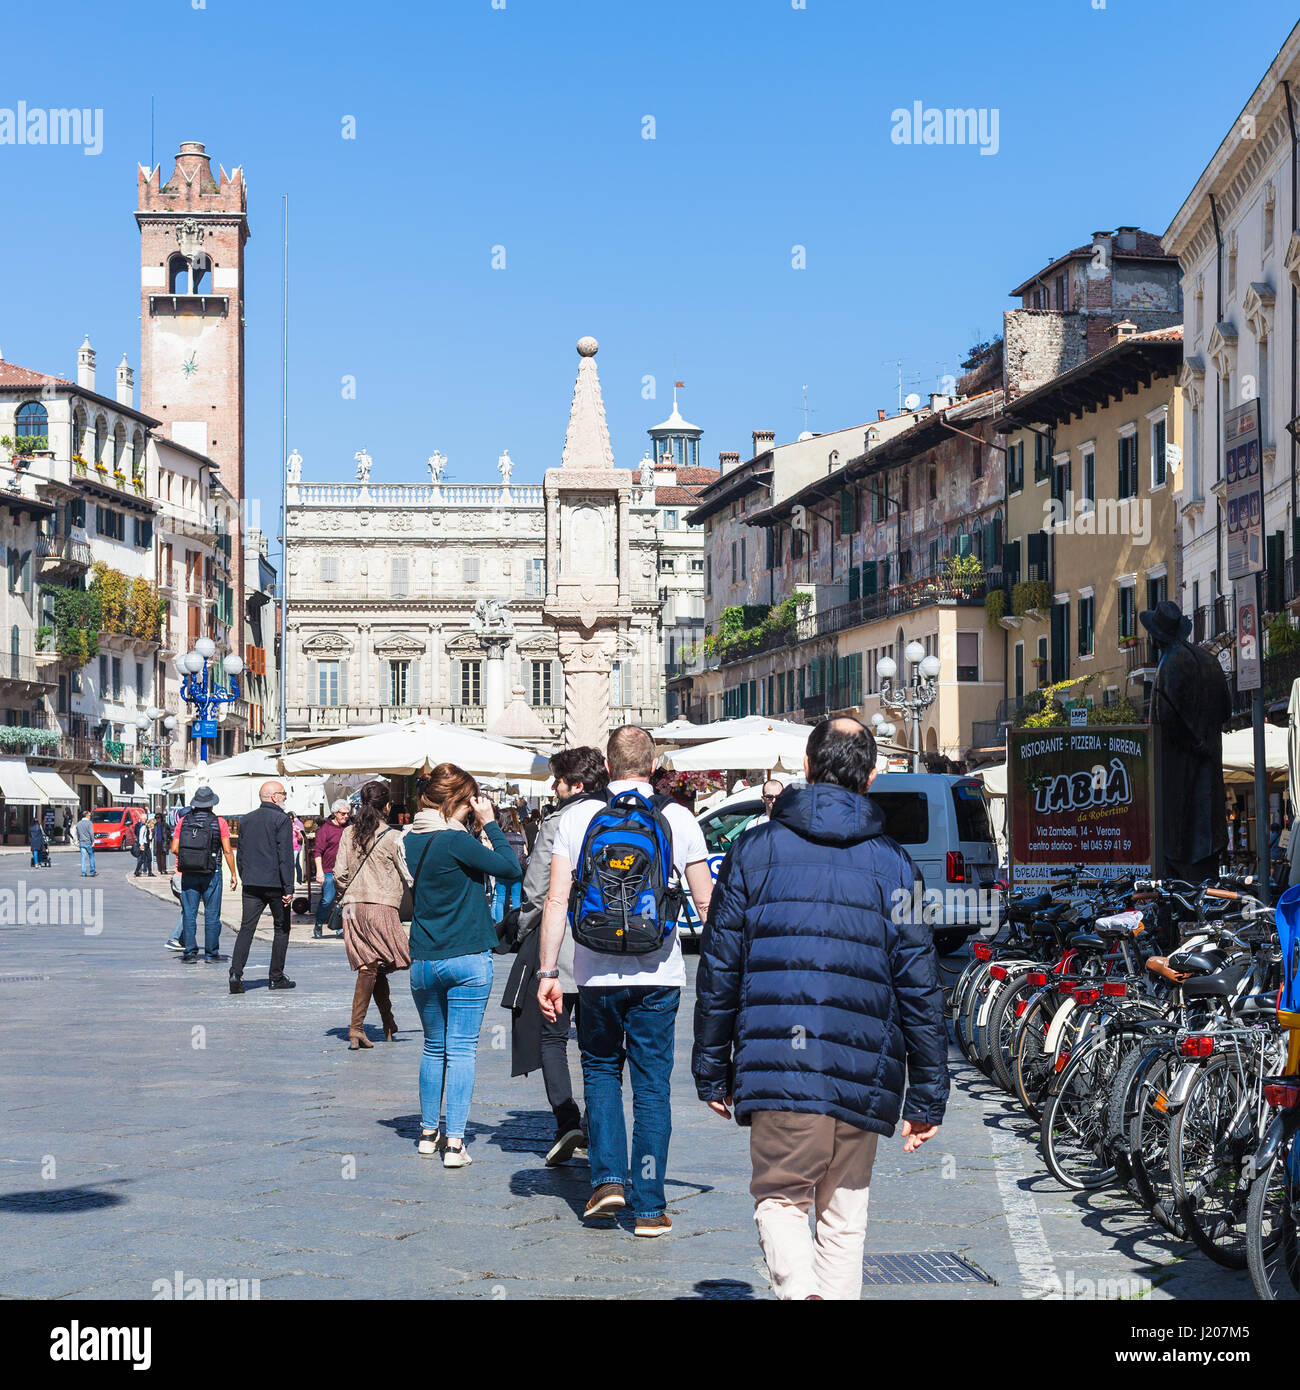 VERONA, ITALY - MARCH 29, 2017: tourists on Piazza delle Erbe (Market's square) in Verona in spring. Verona is city on the Adige river, one of the sev Stock Photo